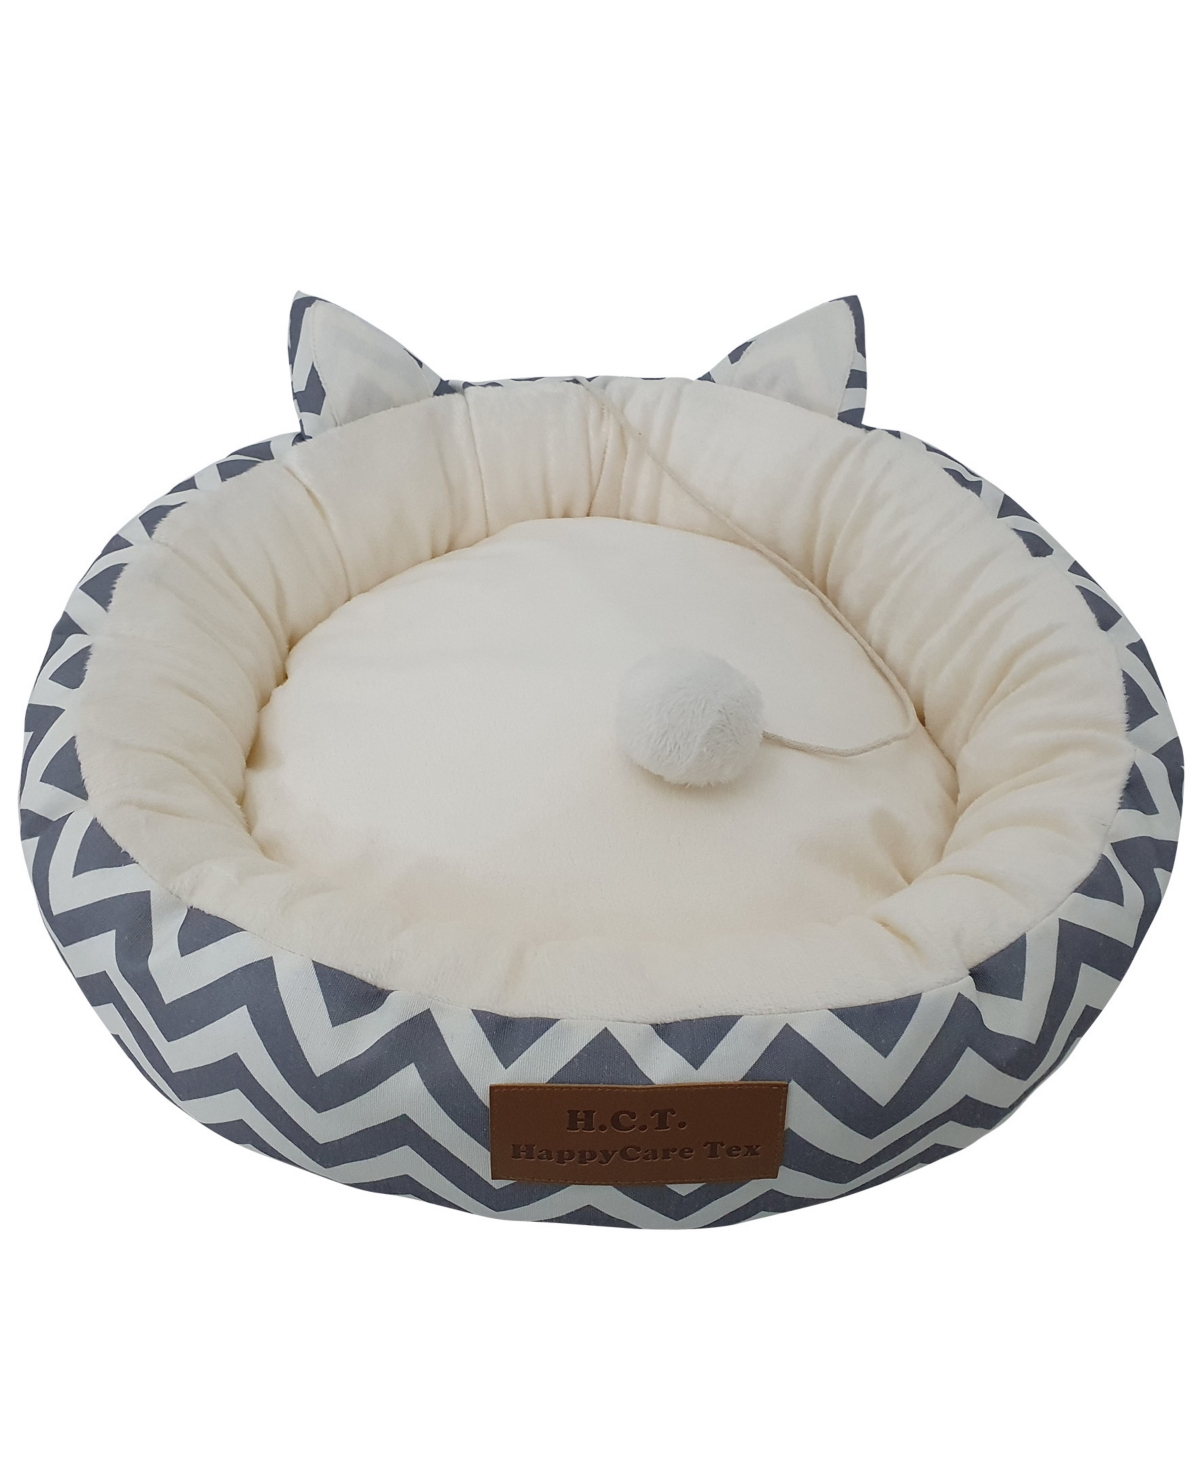 Canvas Round Cat Bed with Toy Ball, Medium - Chevron Gray